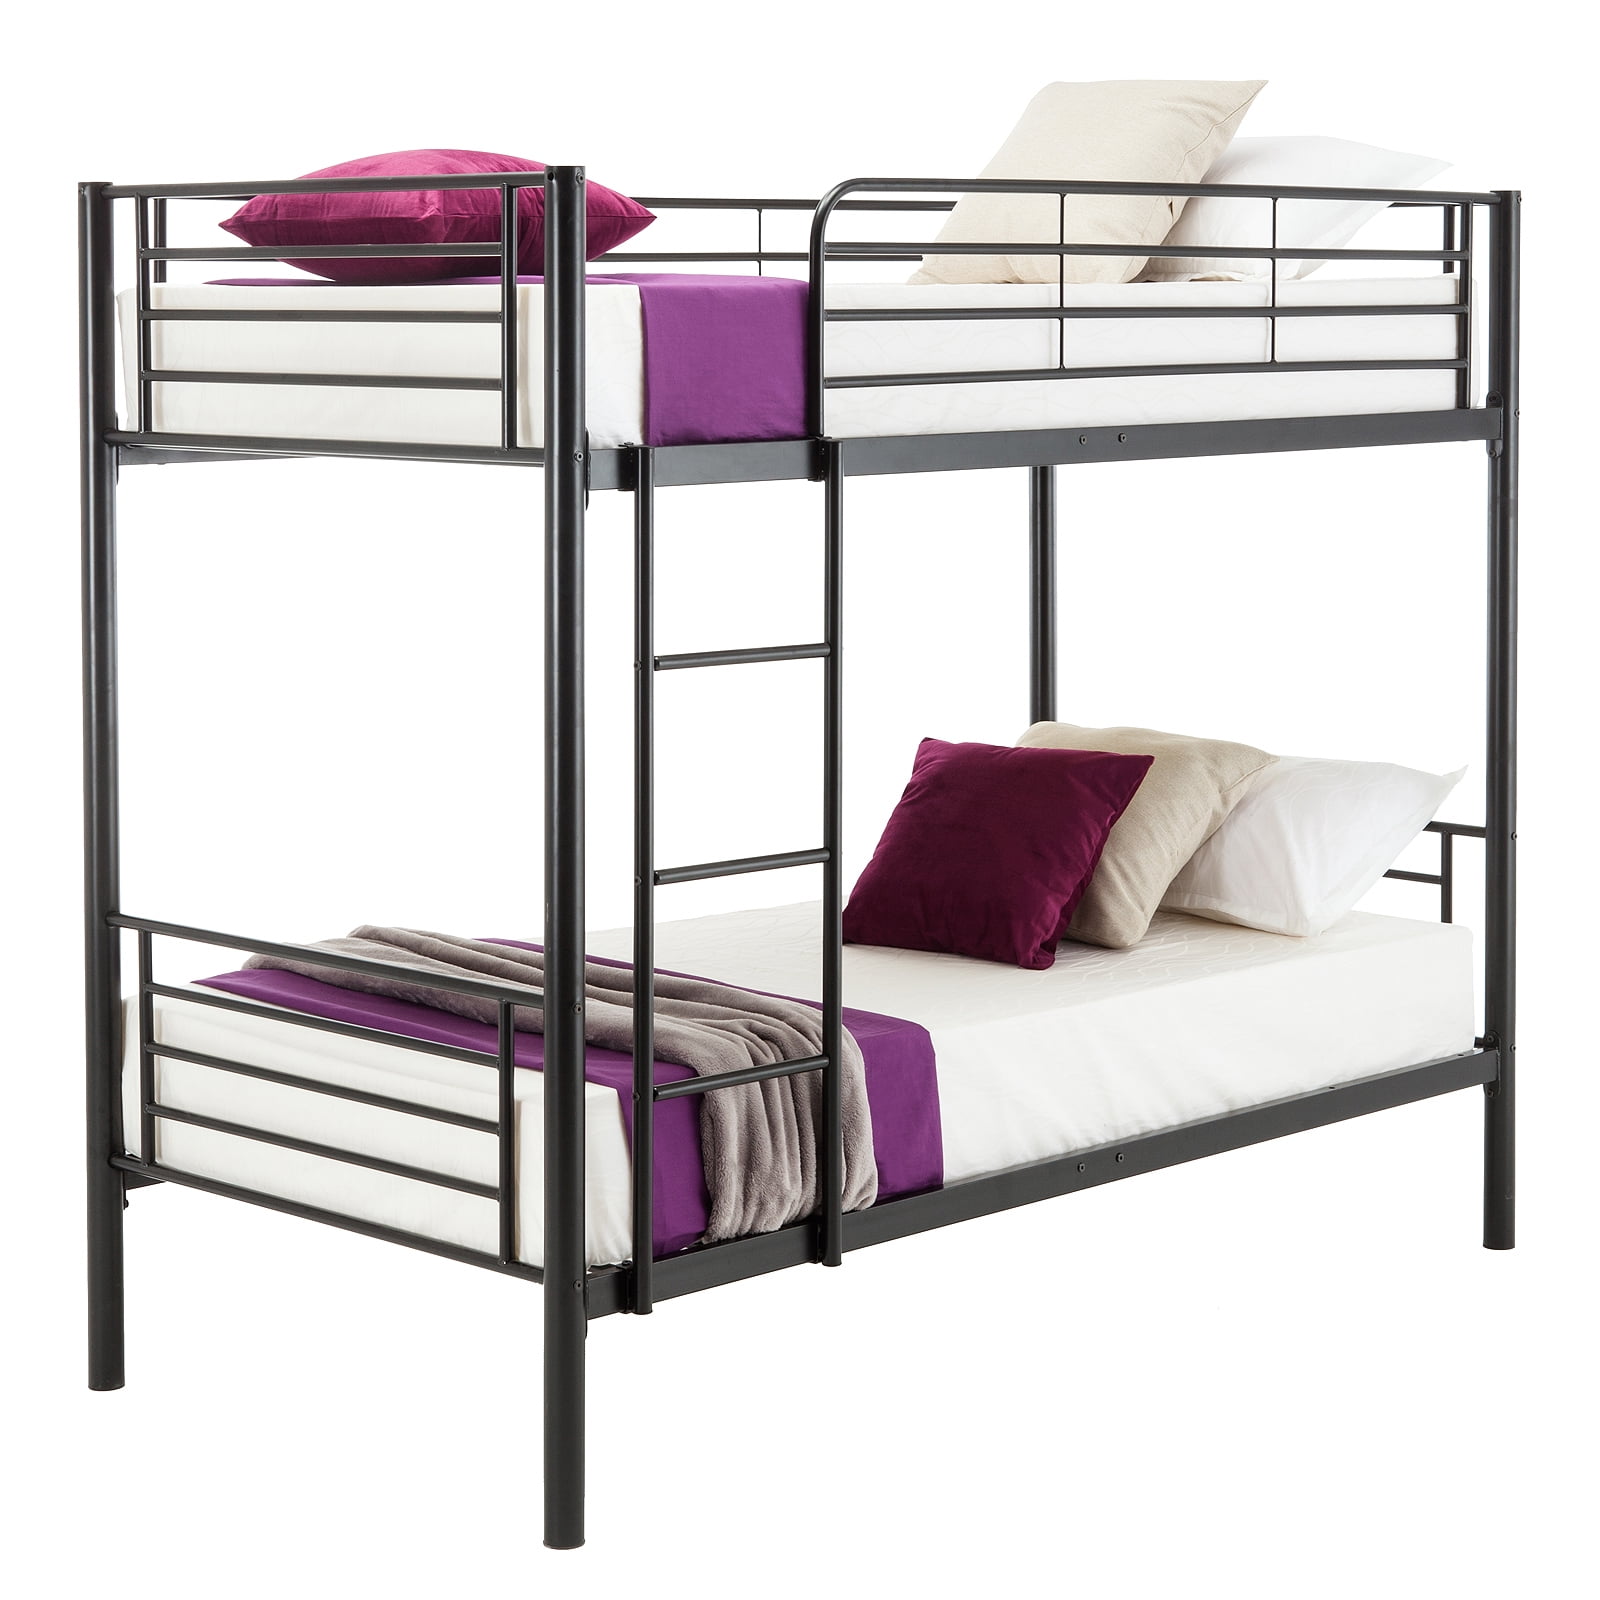 mecor Twin Over Twin Bunk Beds-Convertible Metal Bunk Bed Frame with Movable Ladder Metal Slats for Kids/Adult Children,Sliver 